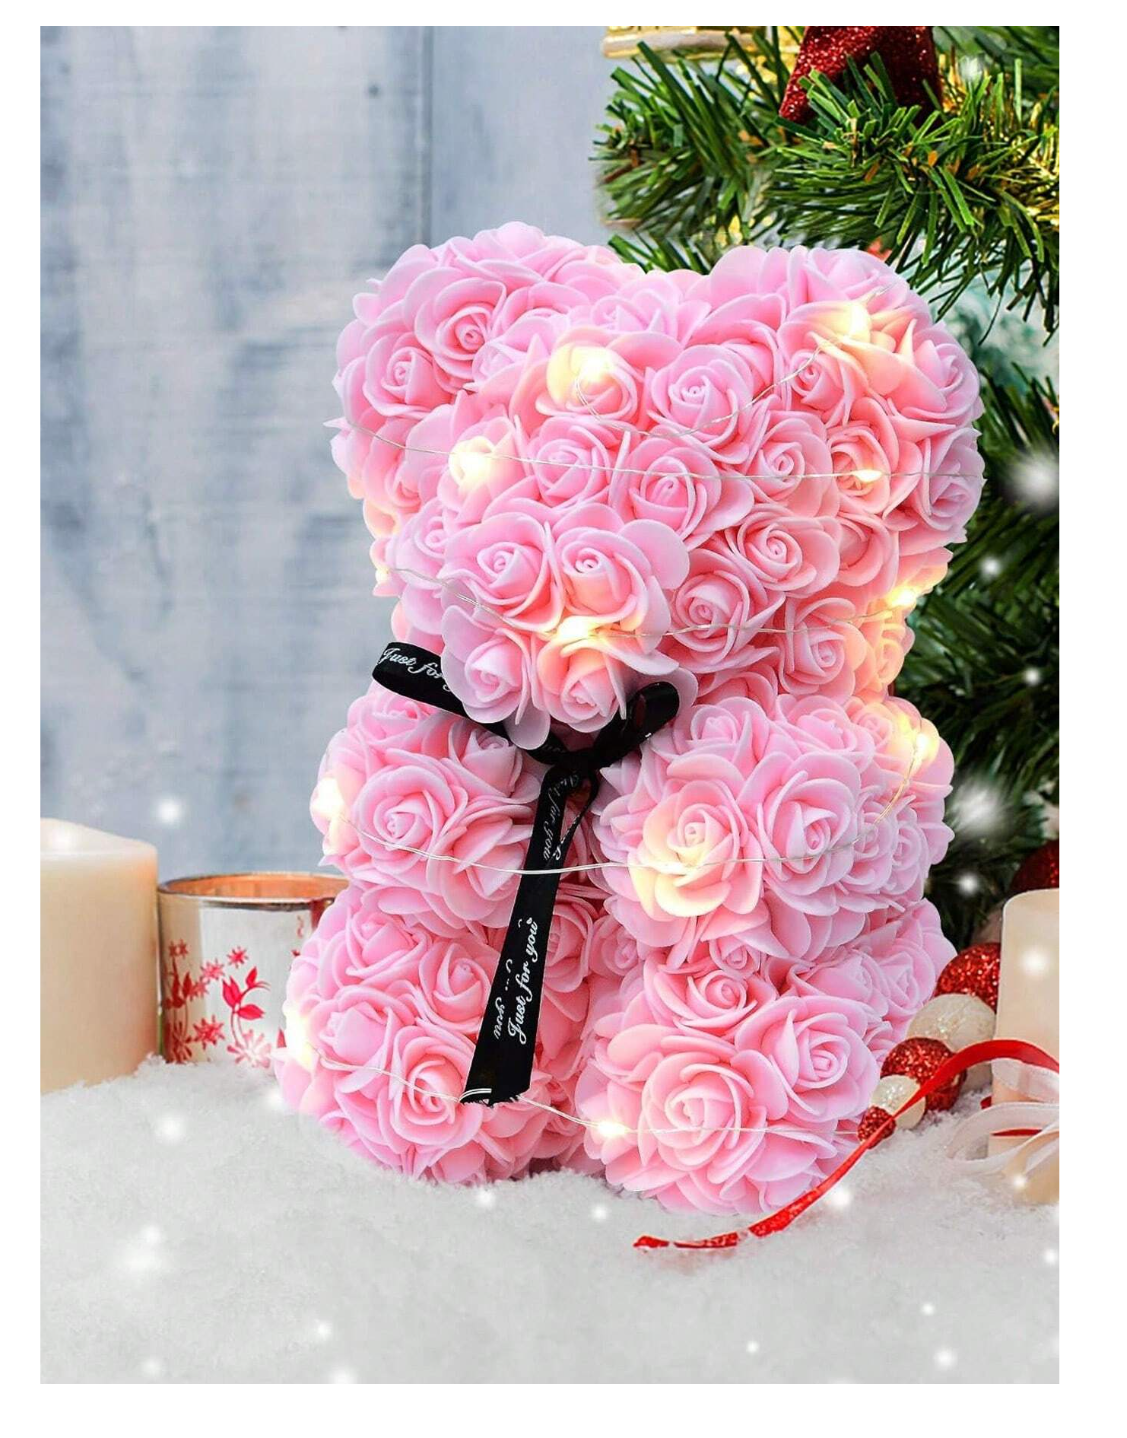 Embrace Forever: Enchanting Valentine's Day Gift - Eternal Rose Bear Crafted with Creative PE Foam Flowers